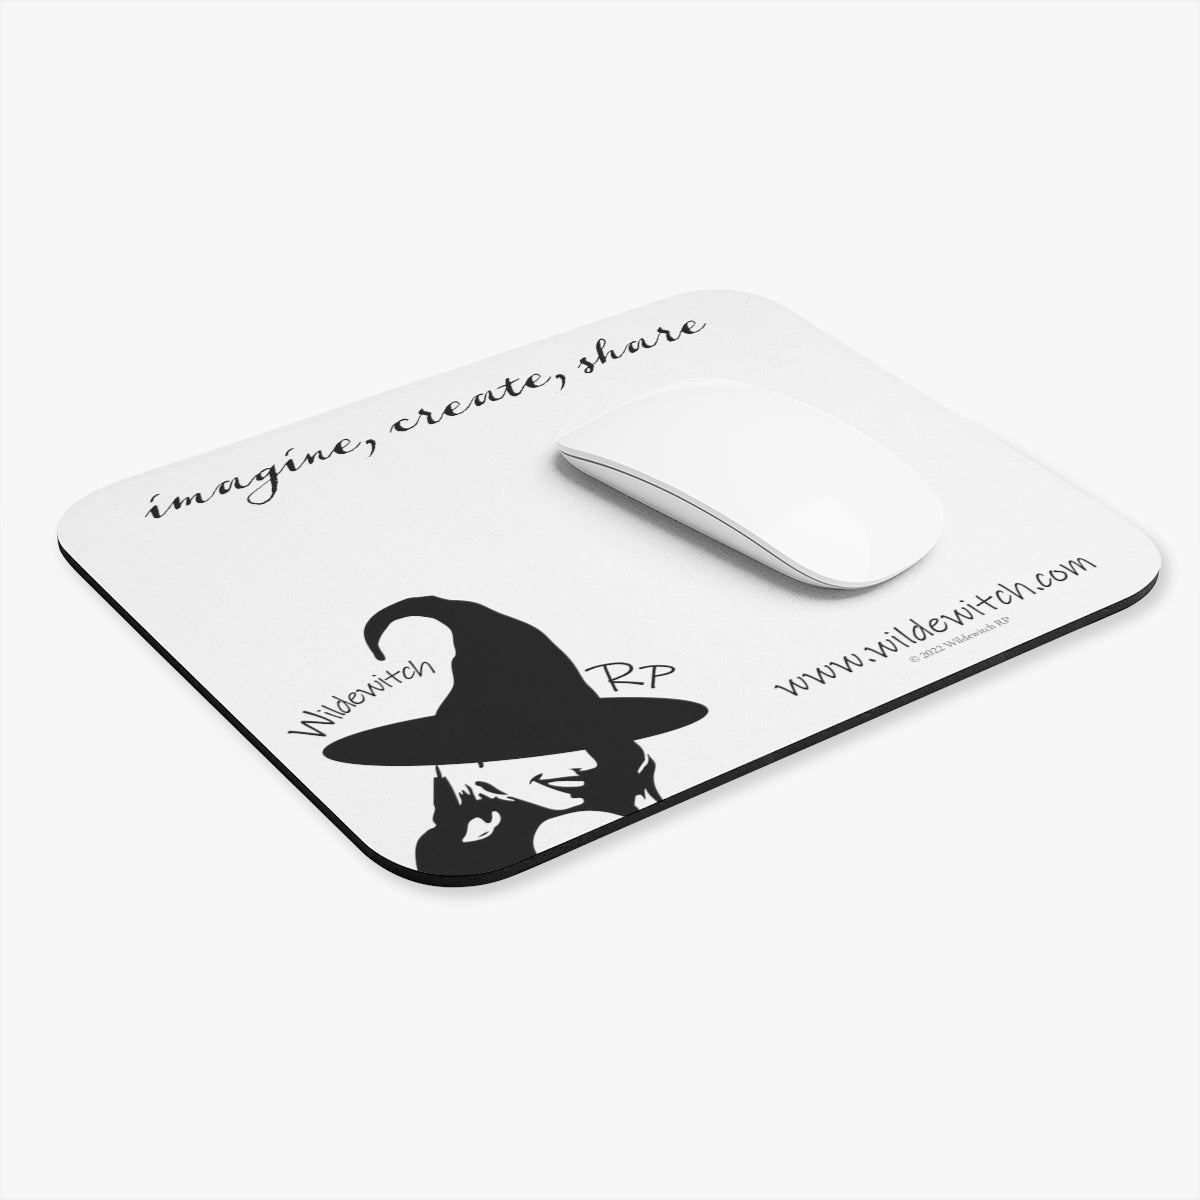 Wildewitch RP Logo Mouse Pad (Rectangle)